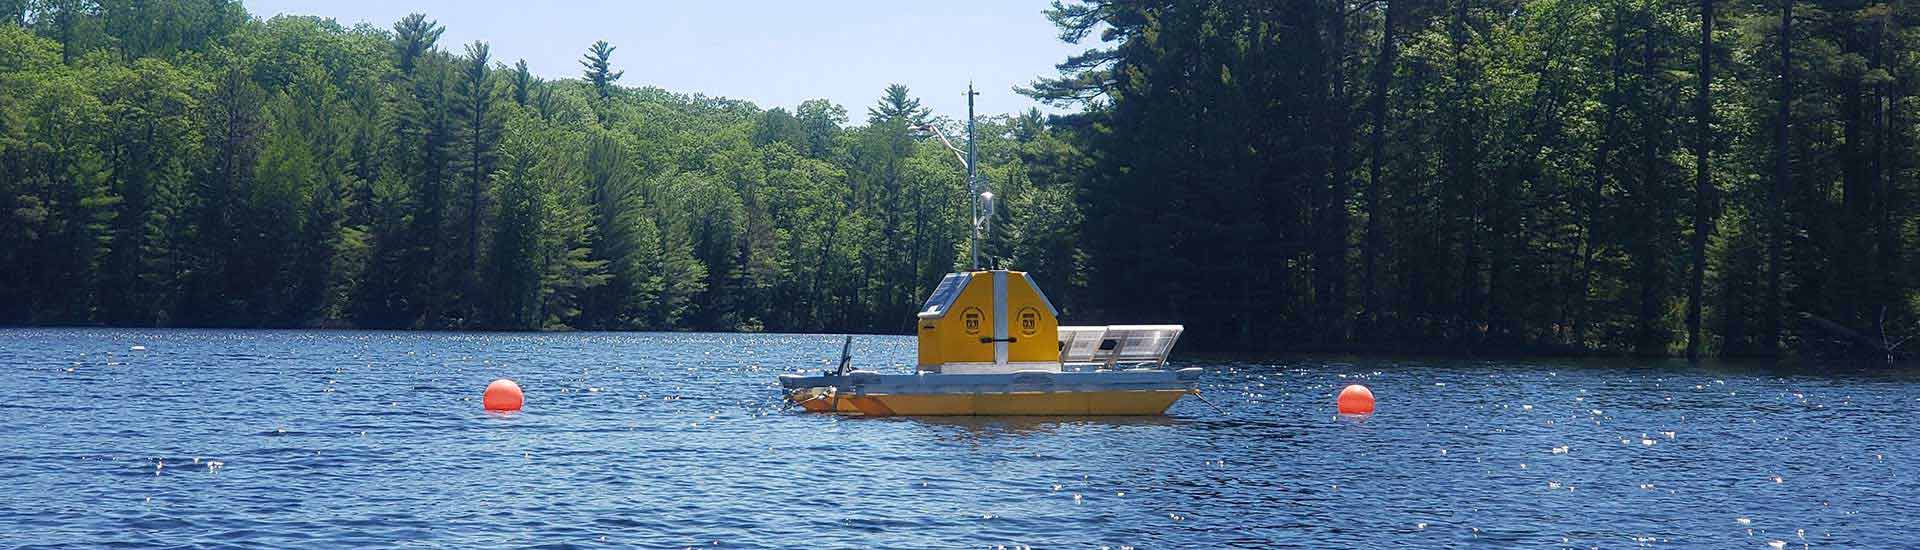 Photo: NEON researchers in a boat conducting work in a lake.